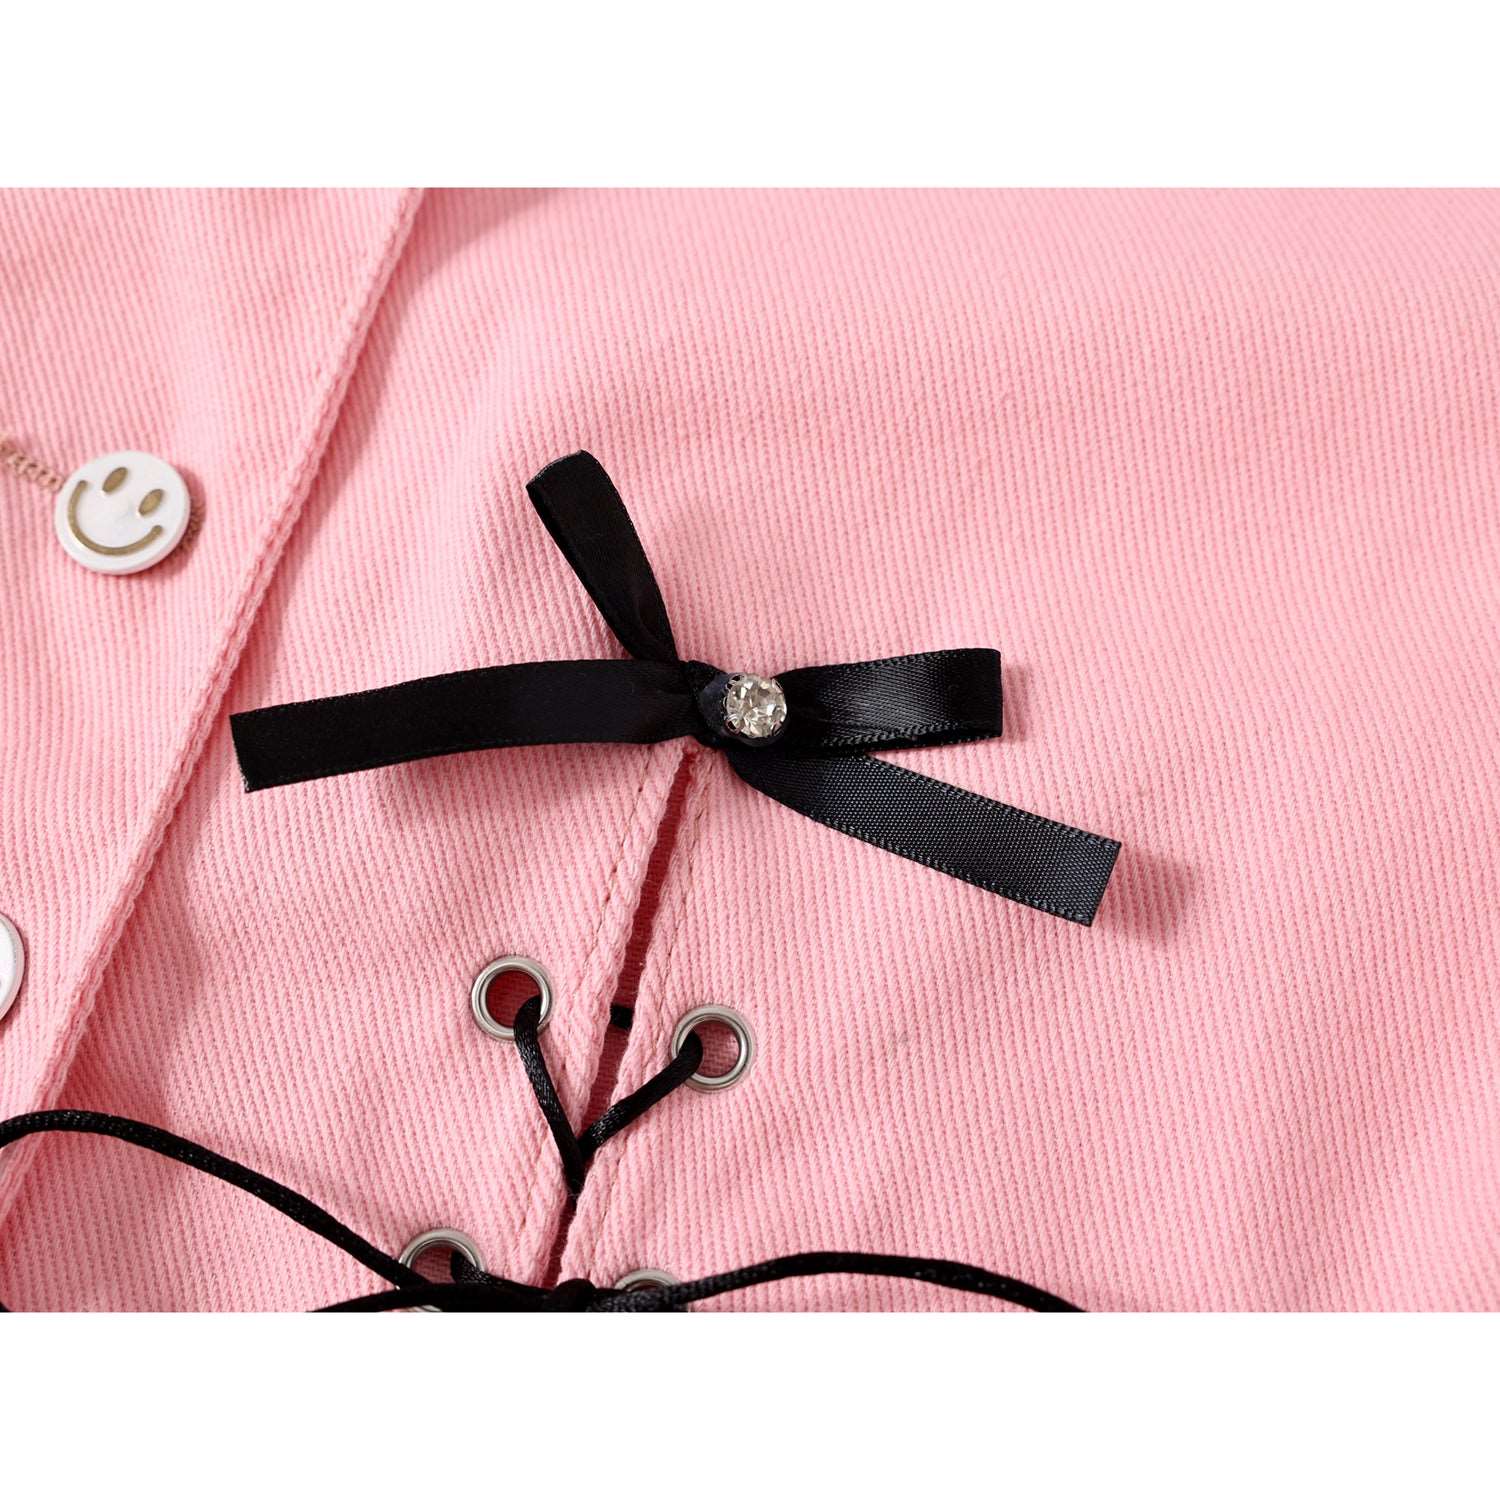 American Style Cool Cowboy Girl Women Black Bow Ribbon Trendy Pink Fashion Small Short Jacket Suit